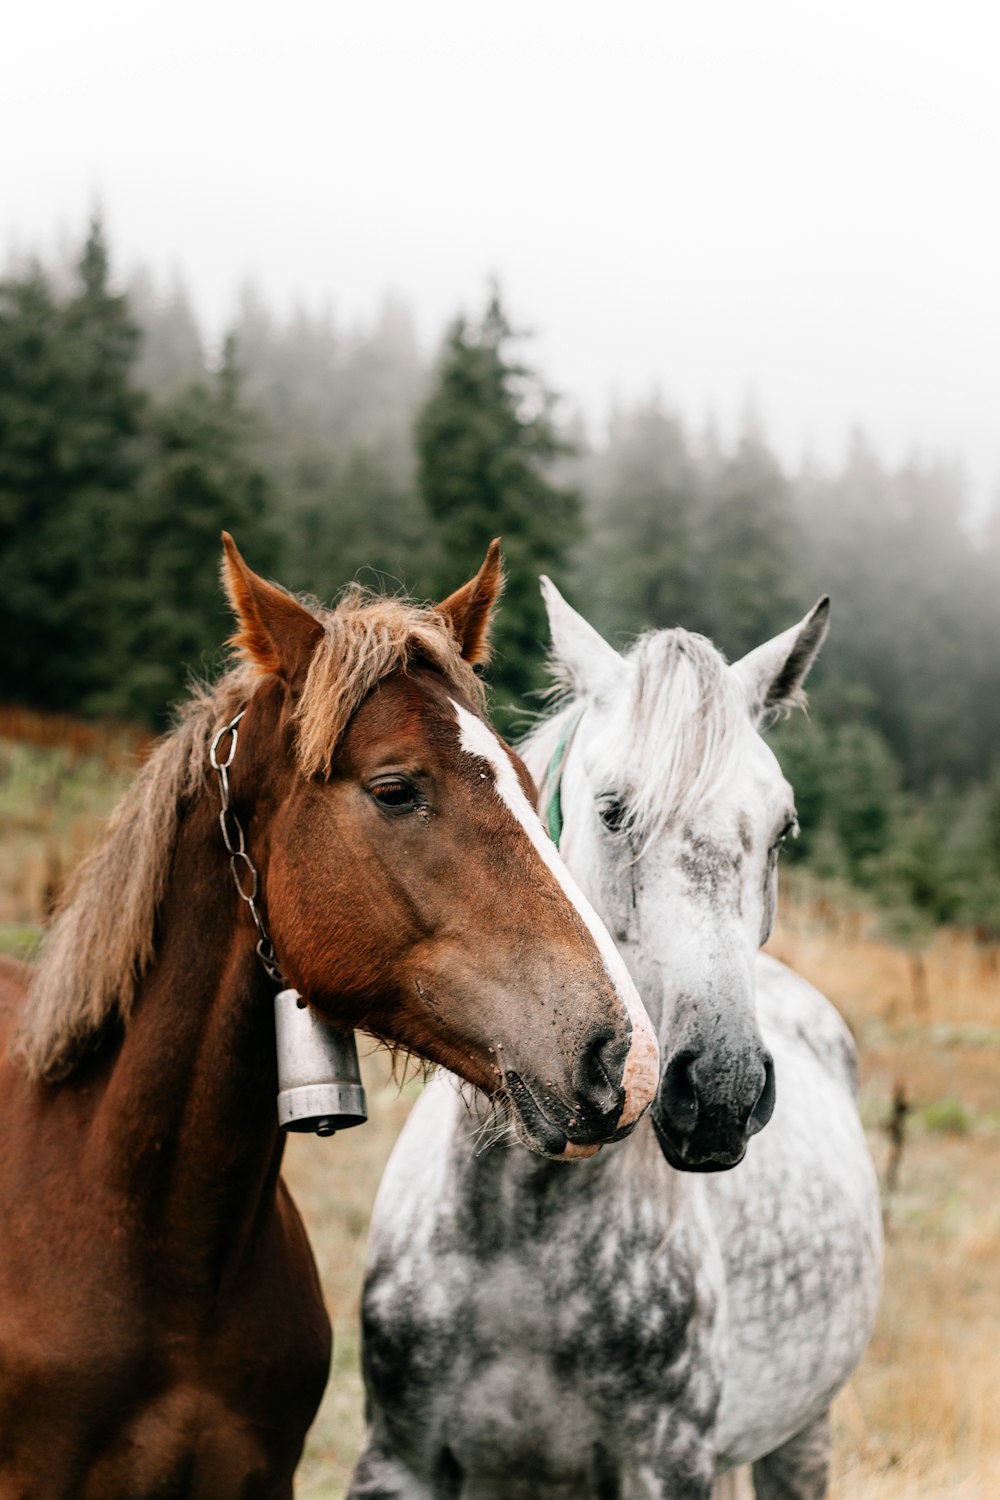 two horses standing next to each other in a field